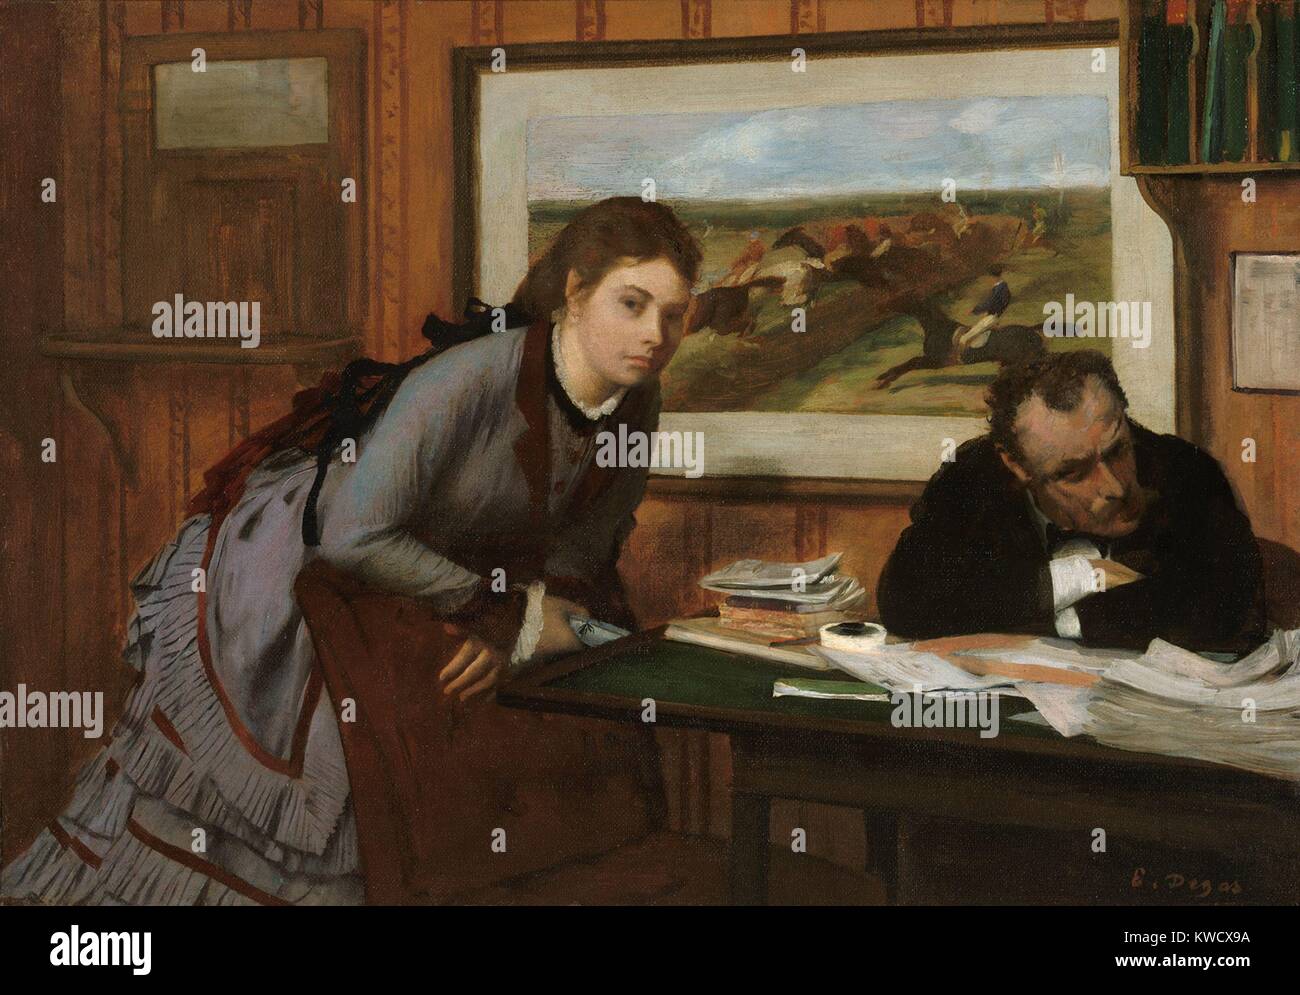 Sulking, by Edgar Degas, 1870, French impressionist painting, oil on canvas. The writer Edmond Duranty and model Emma Dobigny, posed for this early genre scene, set in an office (BSLOC 2017 3 100) Stock Photo